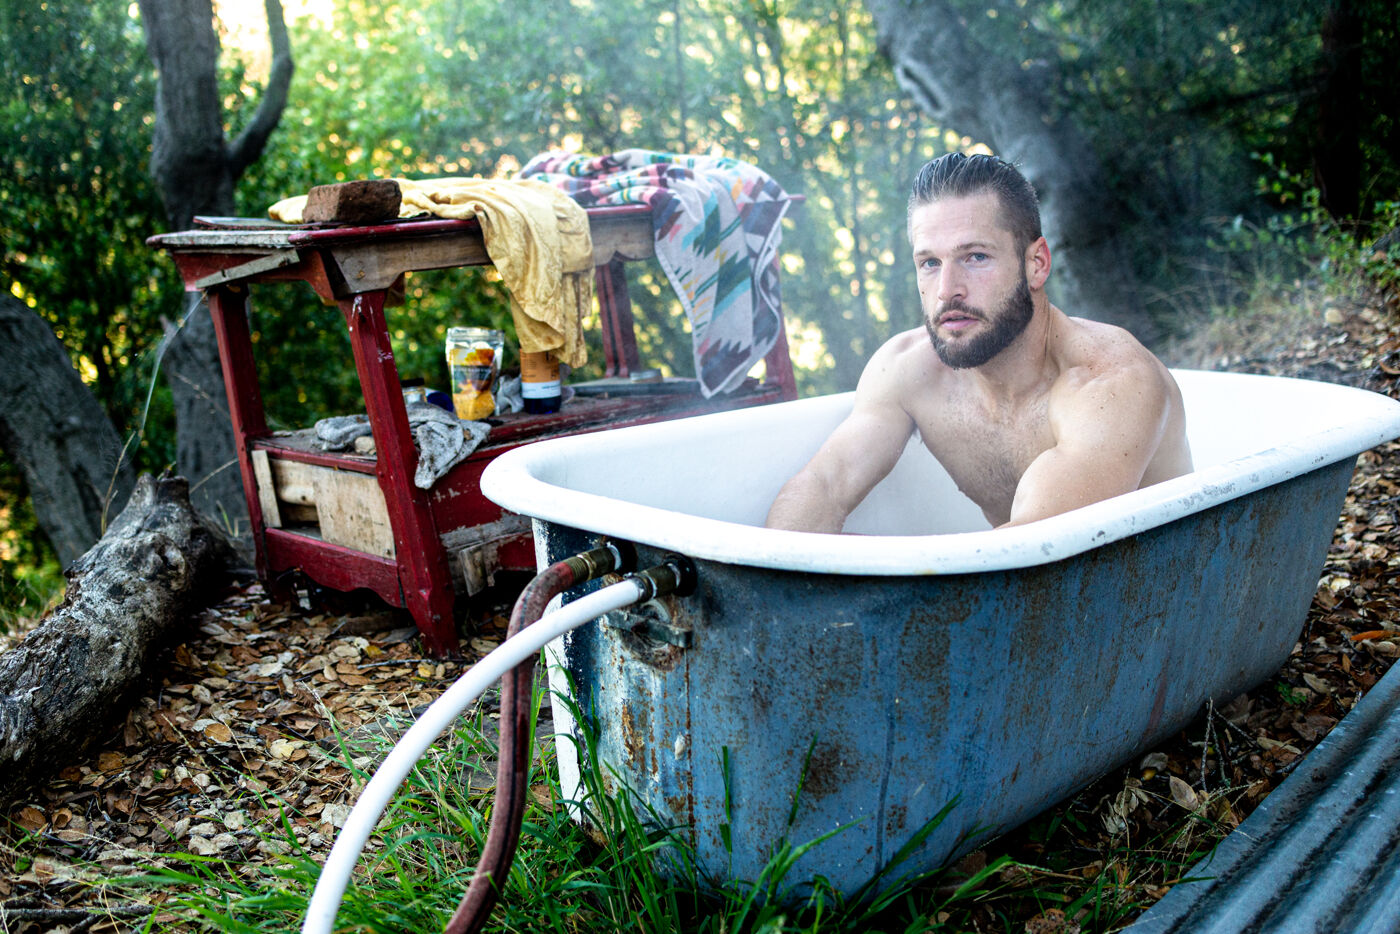 A shirtless man sits in a bath tub in the woods. 